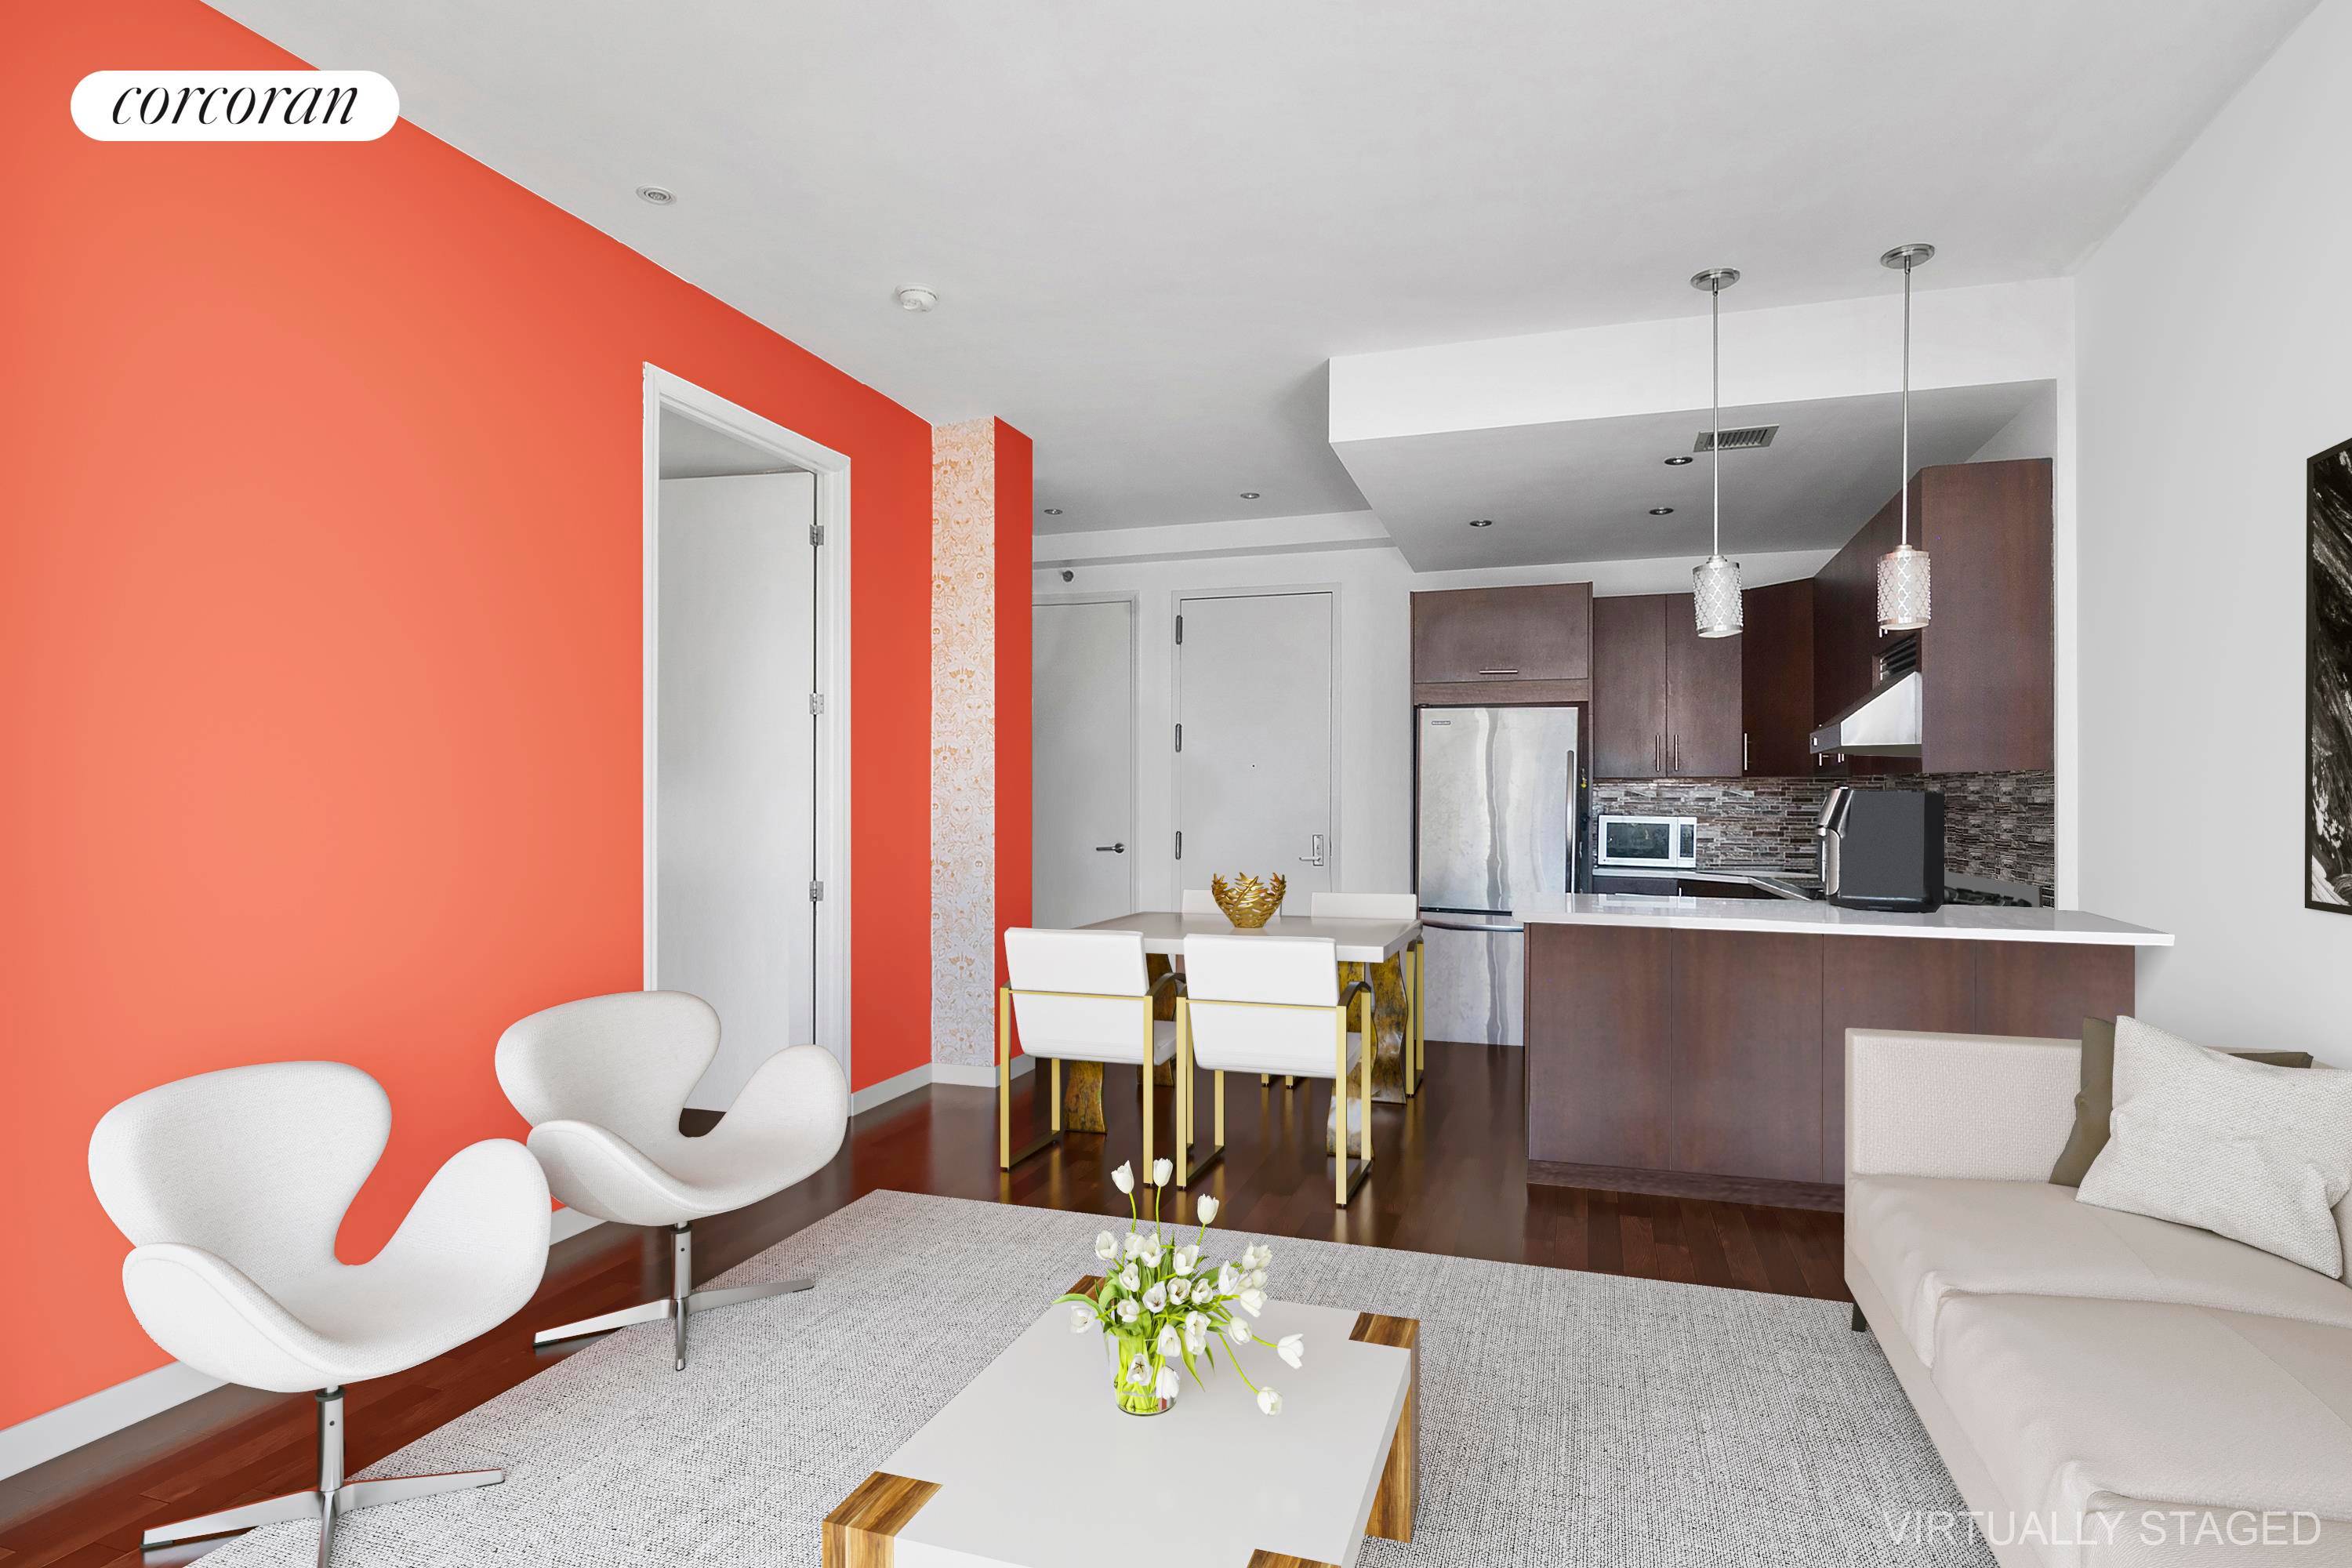 Park Place Condos is centrally located in the Northern section of Crown Heights featuring APT.